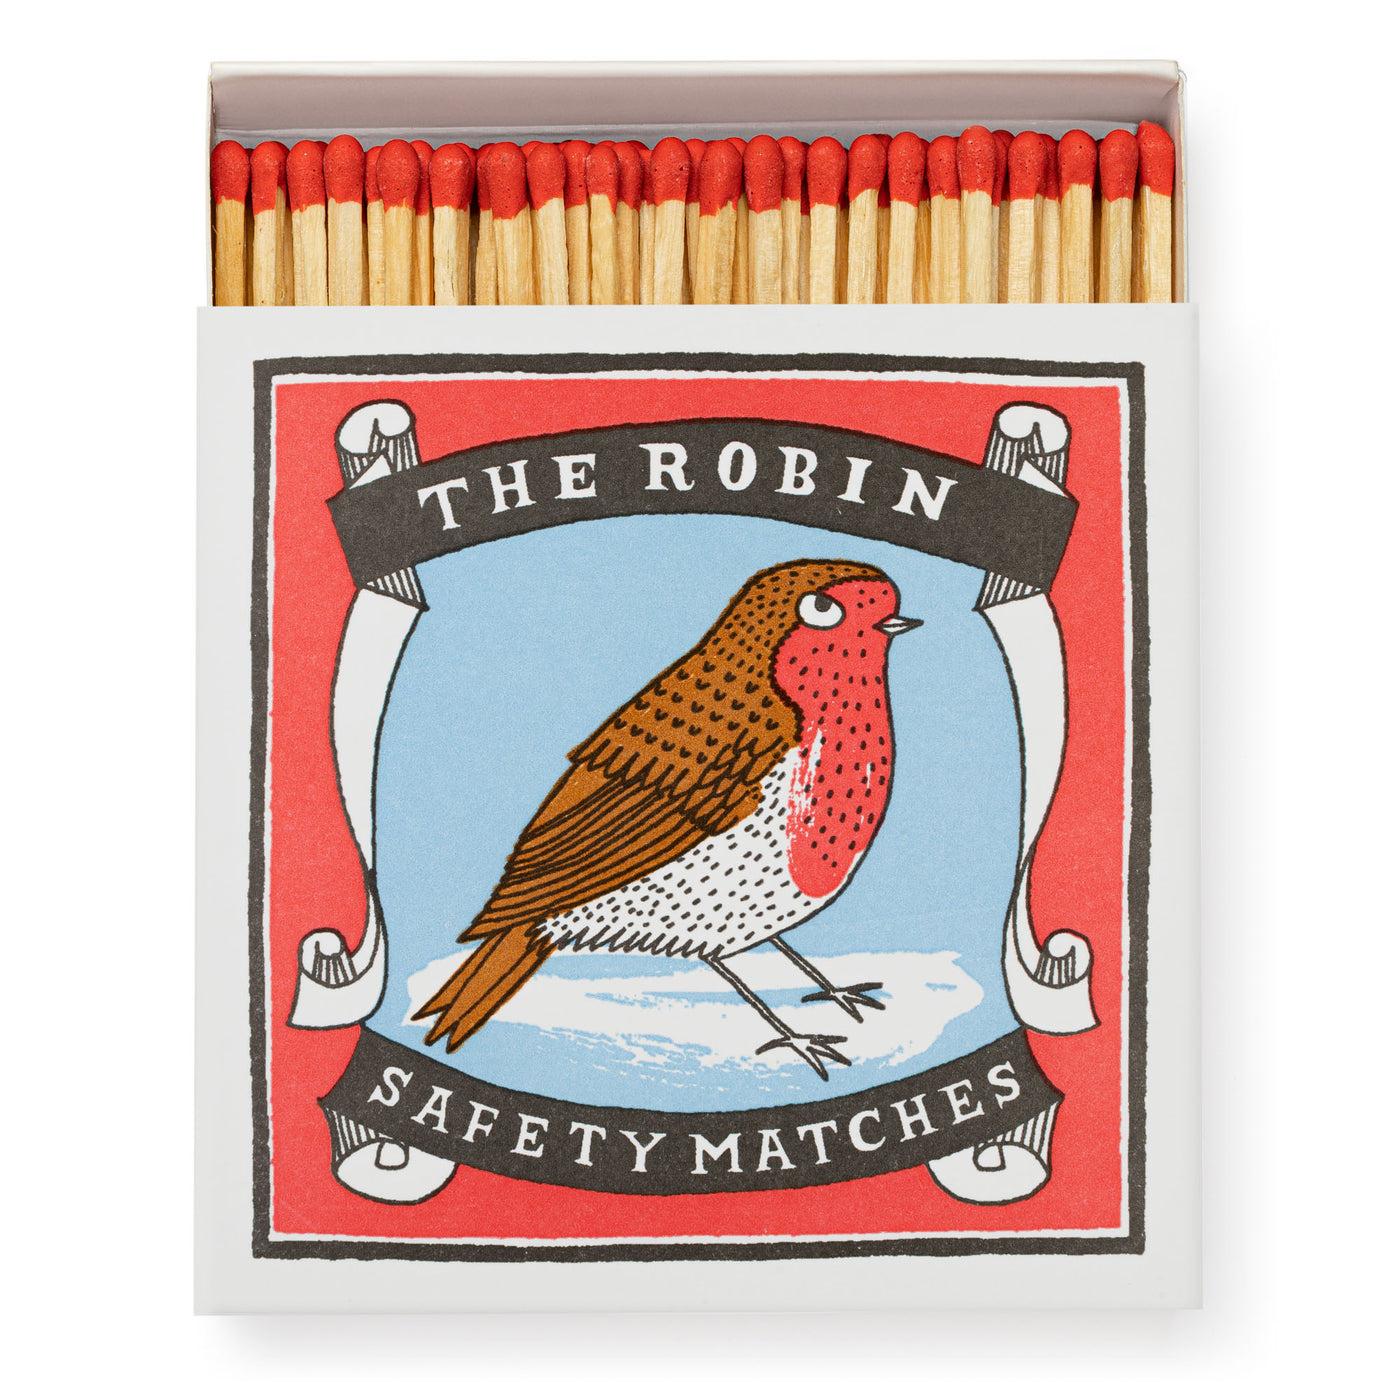 The Robin Matches